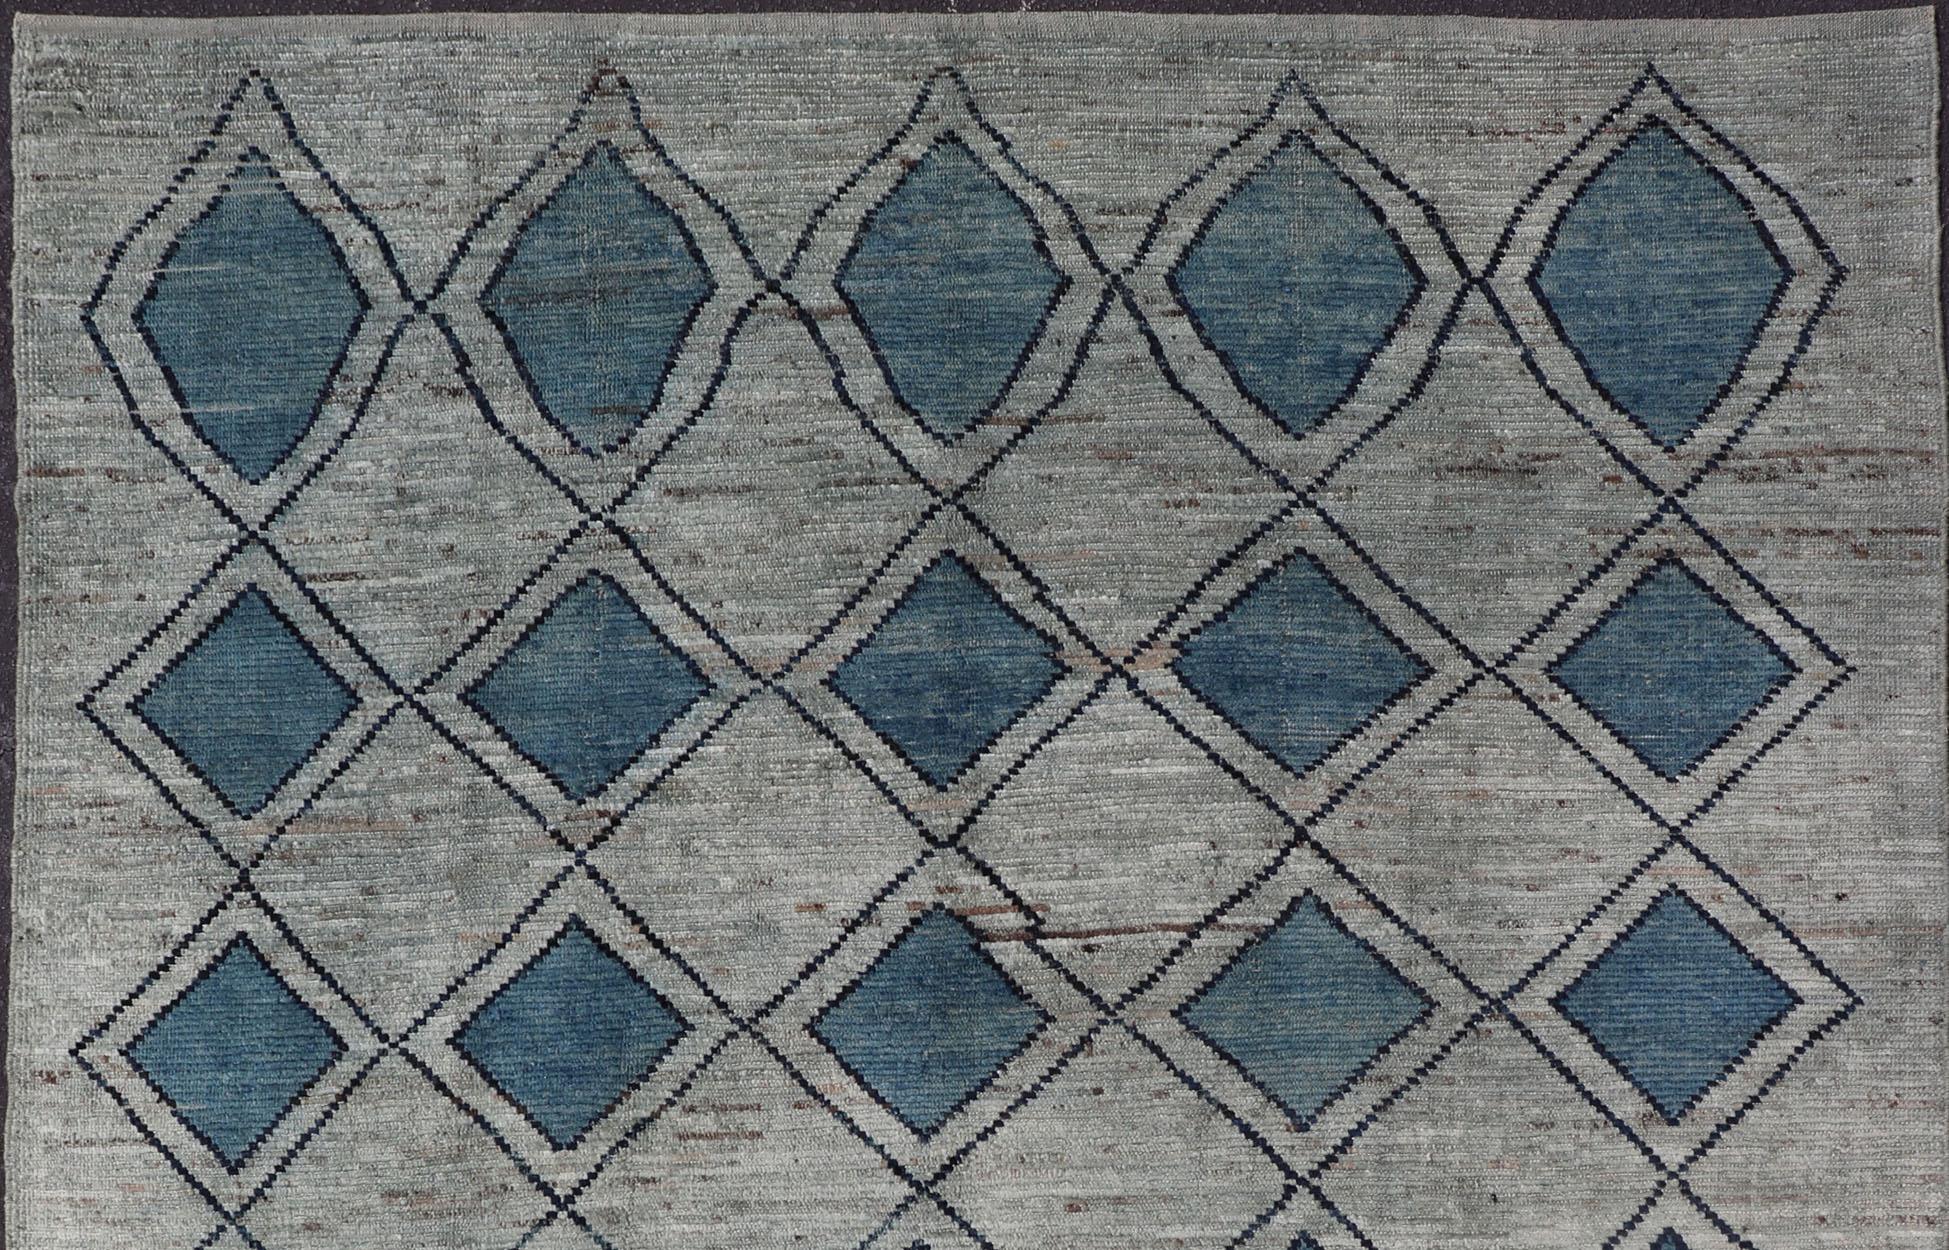 Blue, green, and brown rug with modern casual design and natural wool, Keivan Woven Arts / rug AFG-31855, country of origin / type: Afghanistan / Modern

This classic natured Moroccan design rug represents modern casual look and features